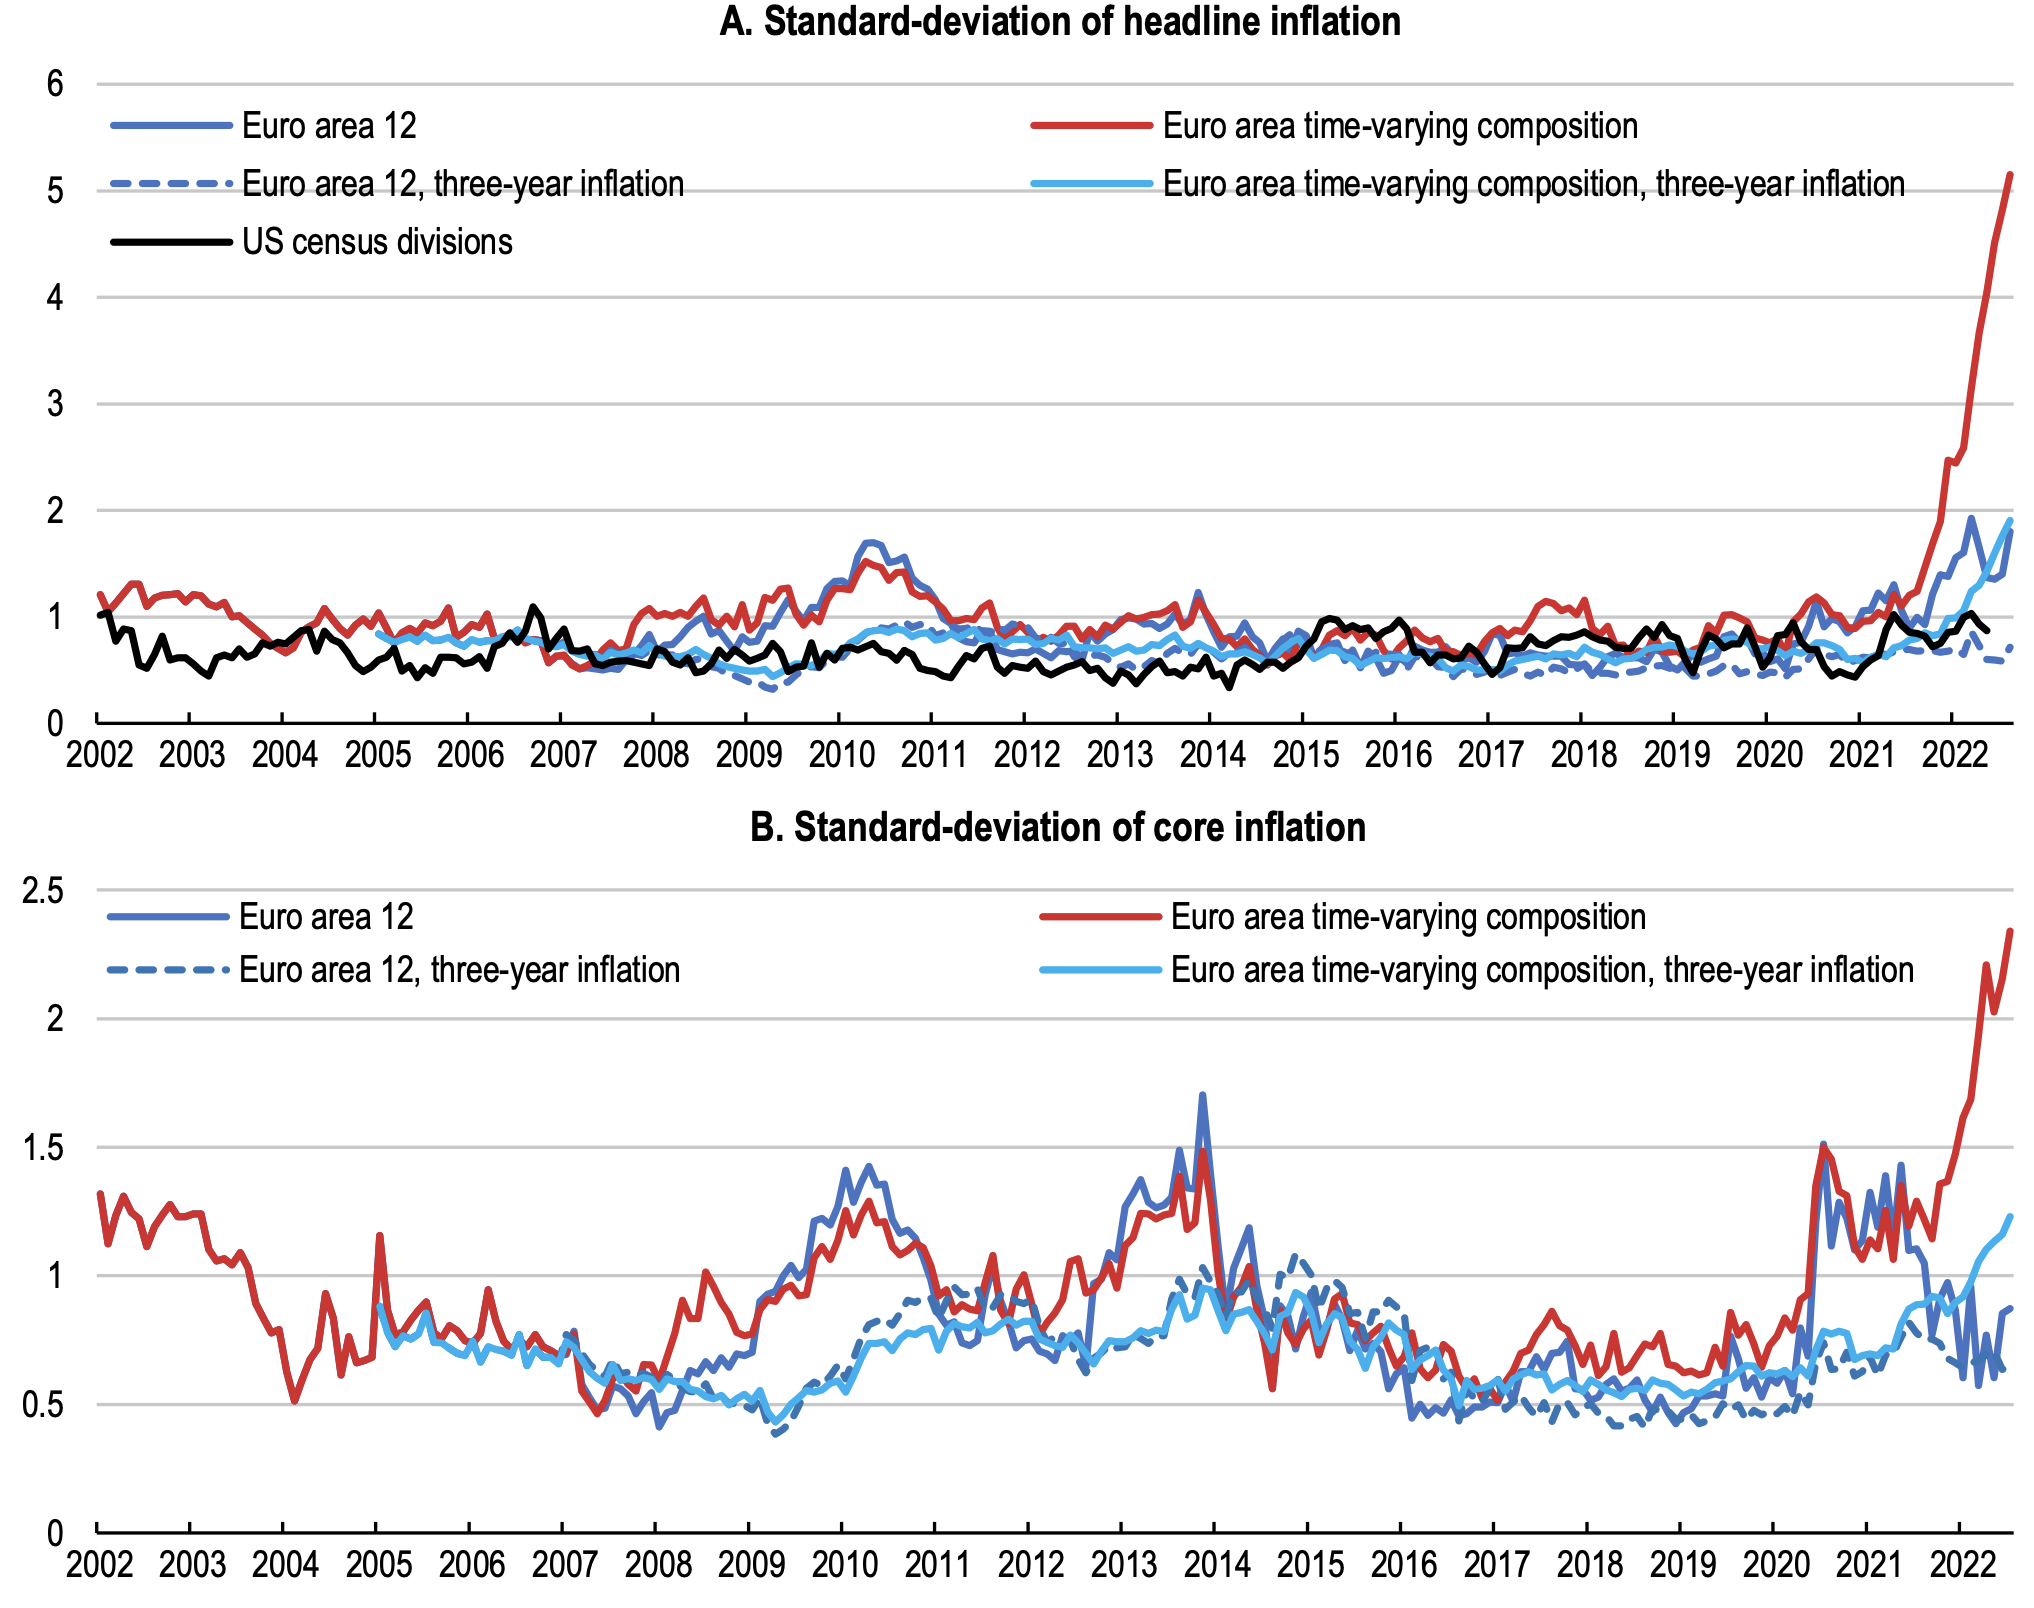 Figure 2 Dispersion of headline and core inflation in the euro area